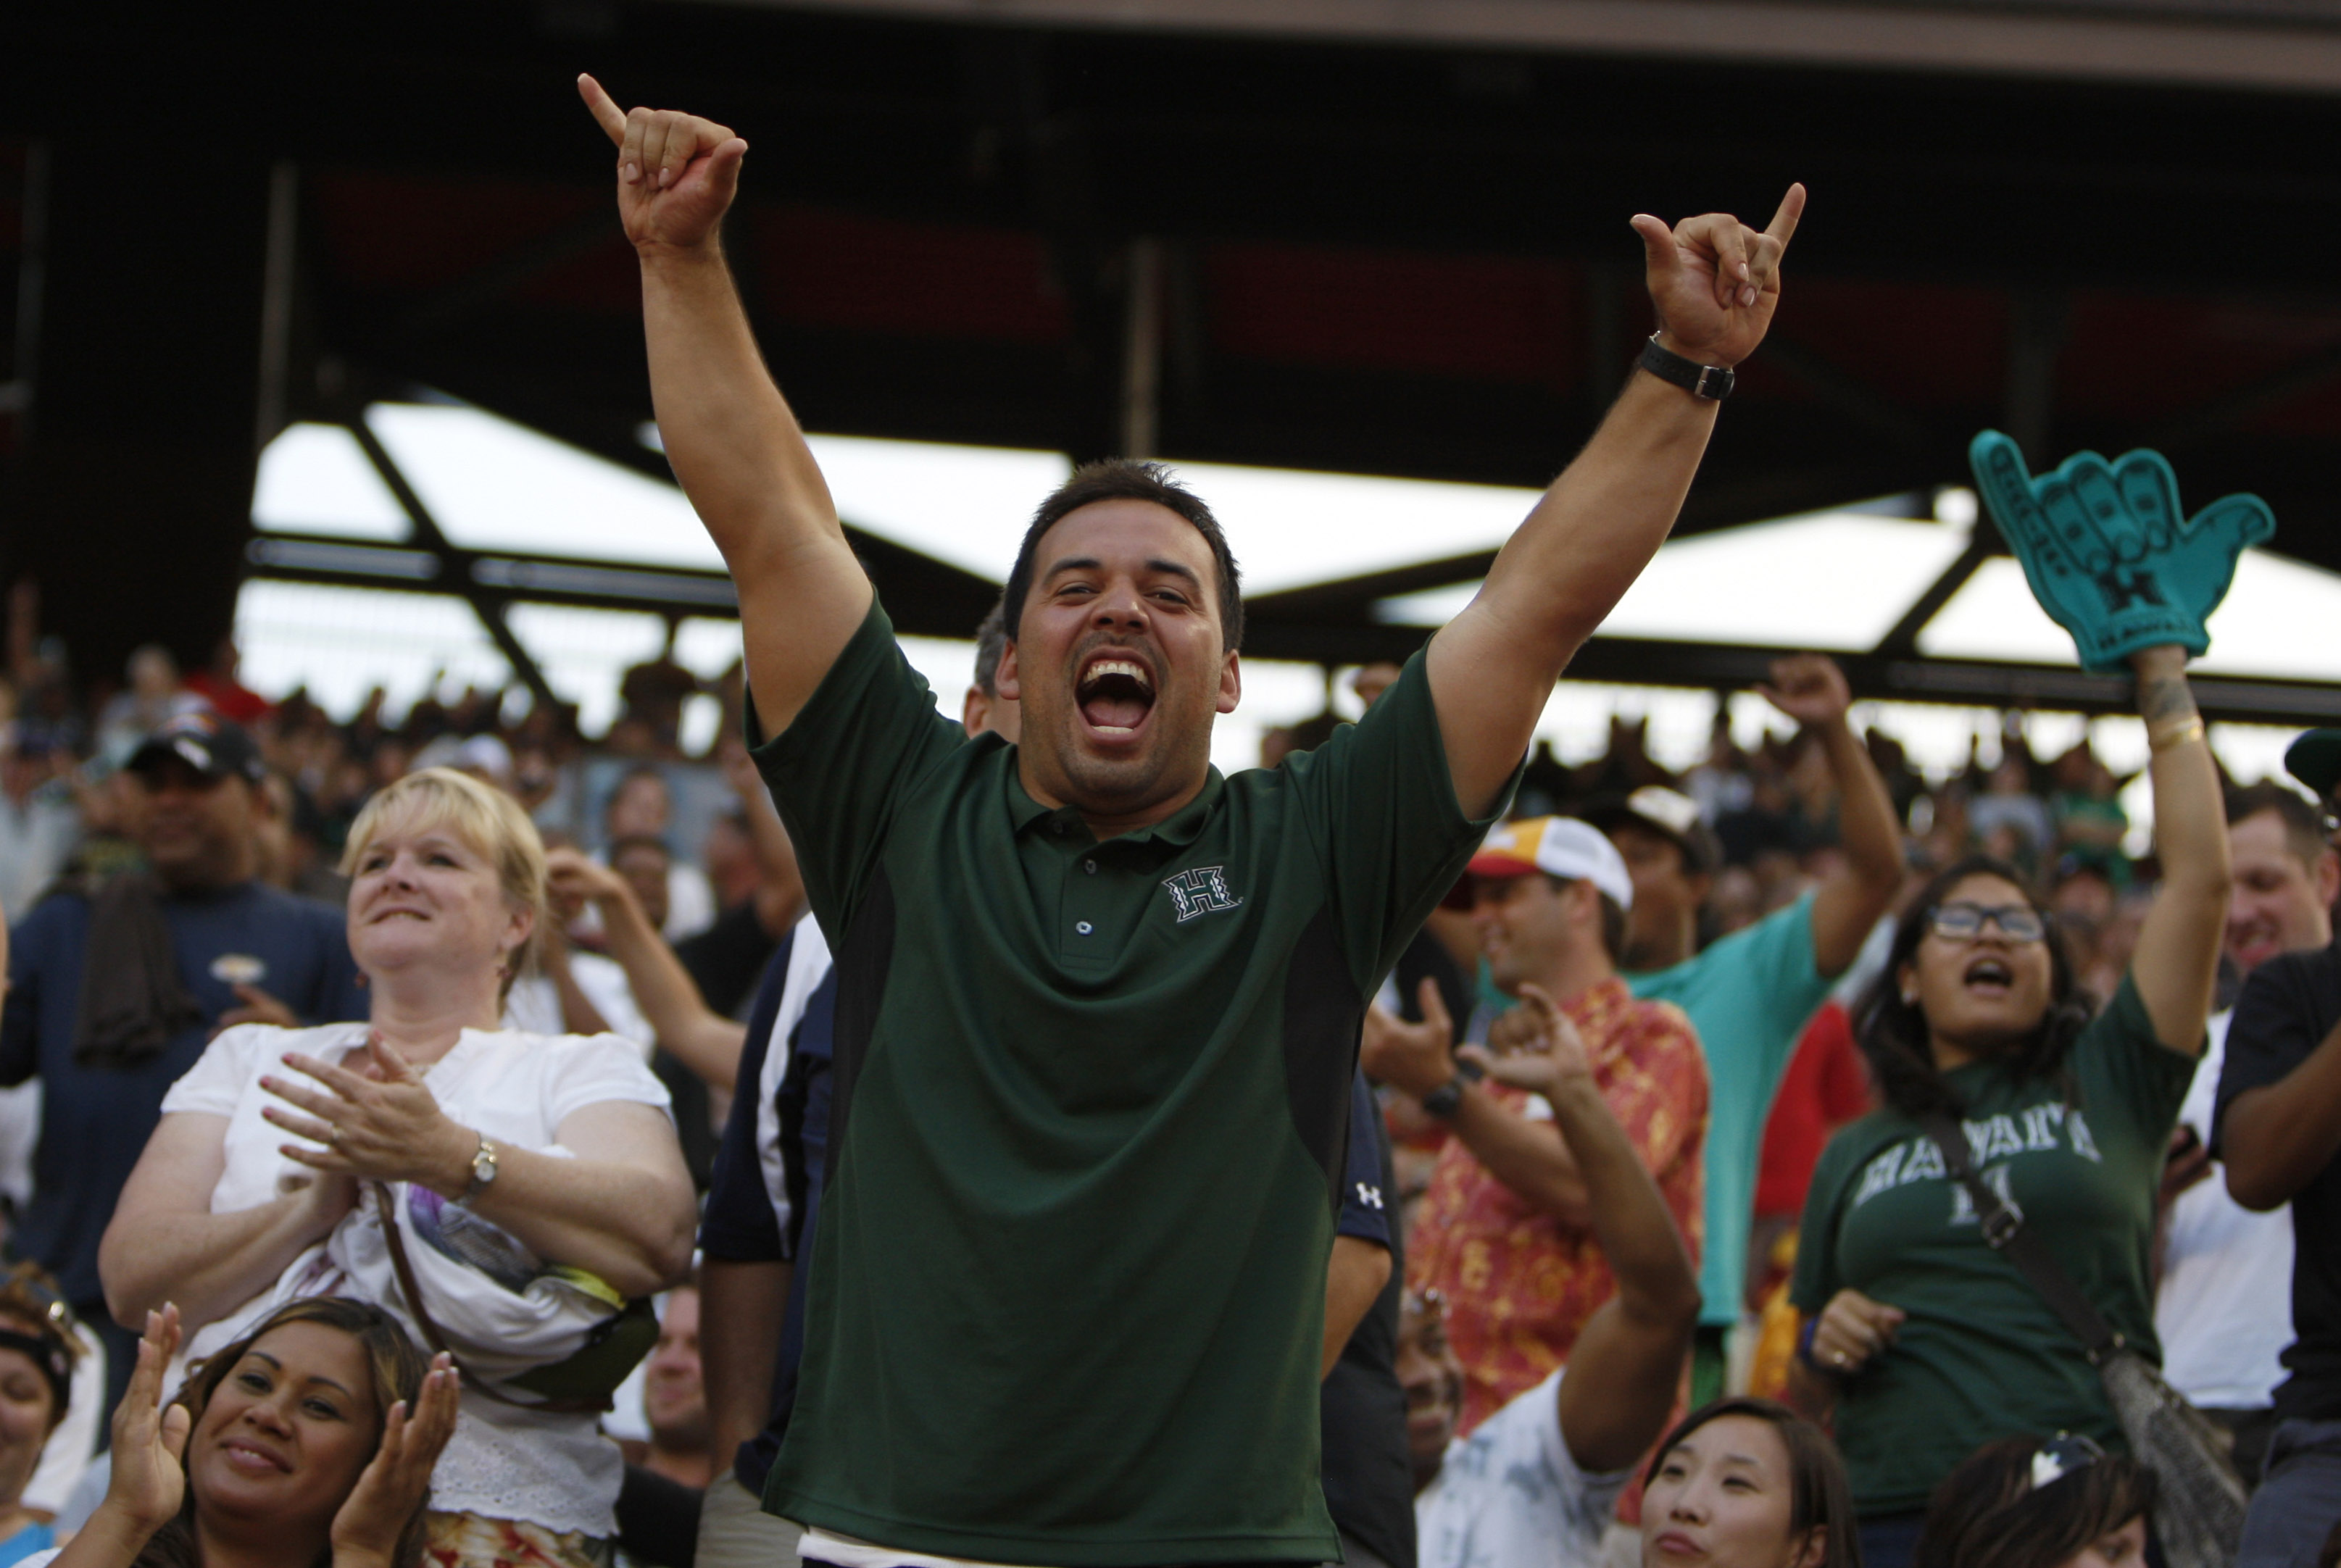 HONOLULU - SEPTEMBER 02: Fans cheer during first half action at Aloha Stadium September 2, 2010 in Honolulu, Hawaii. (Photo by Kent Nishimura/Getty Images)